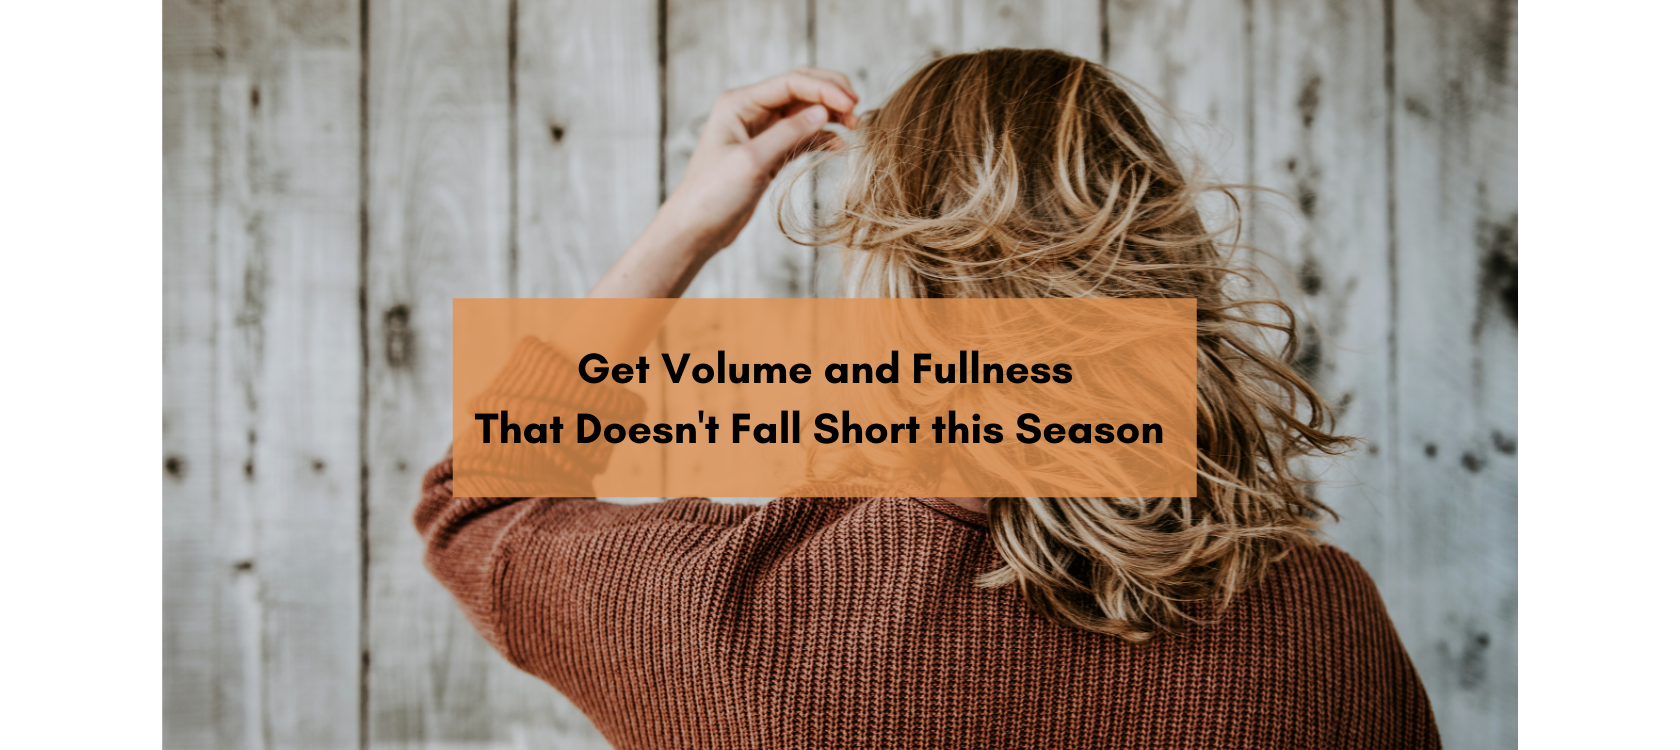 How to Get Volume and Fullness that Doesn’t Fall Short this Season